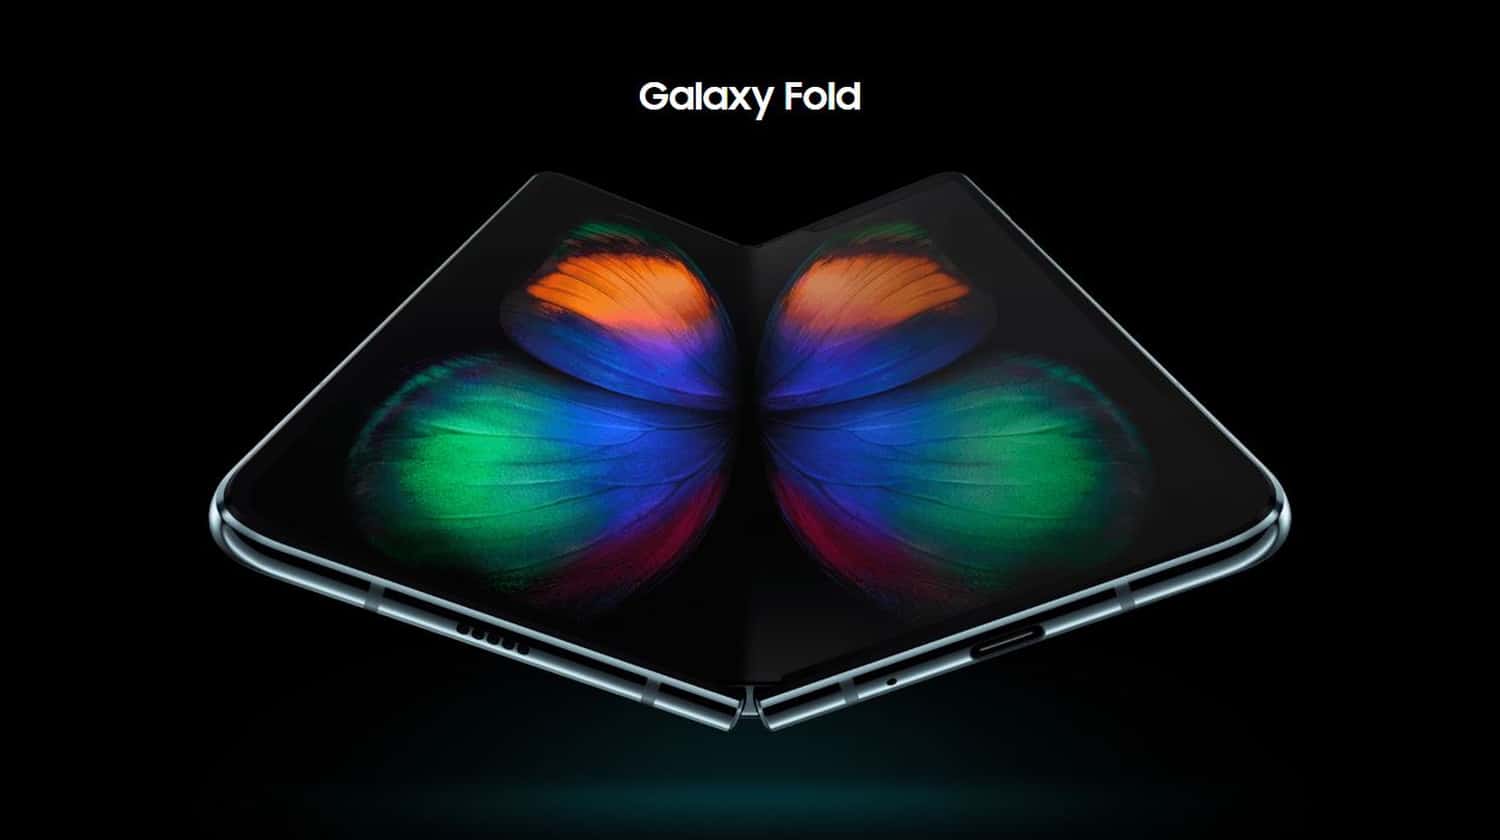 Feature | Samsung Galaxy Fold | A First Look At Samsung's First Foldable Smartphone